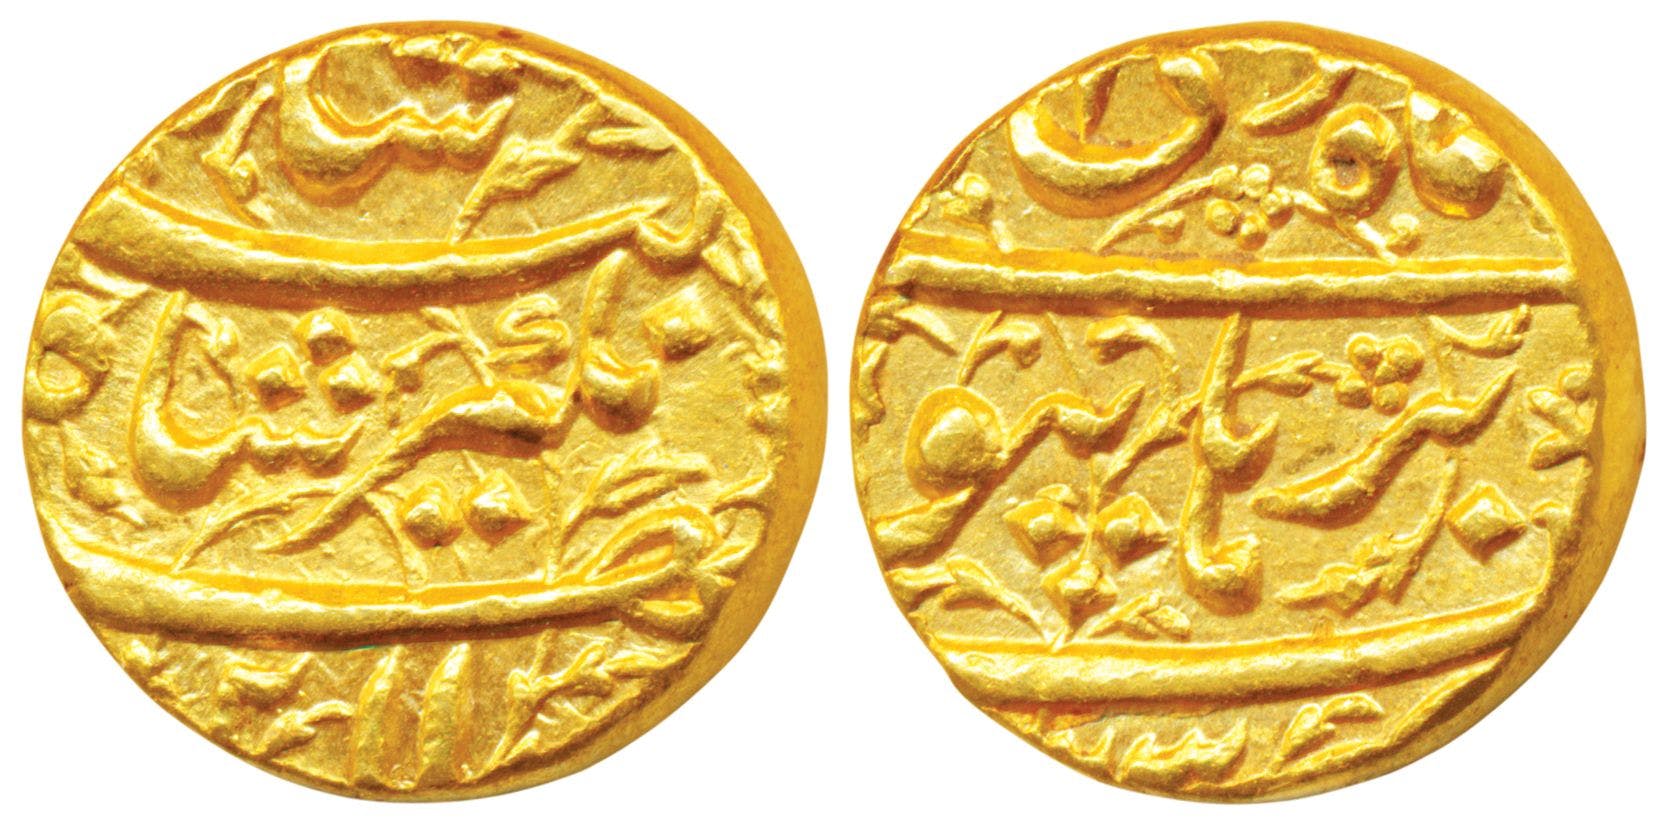 Gold coin of Mughal Emperor Jahangir (17th Century CE)